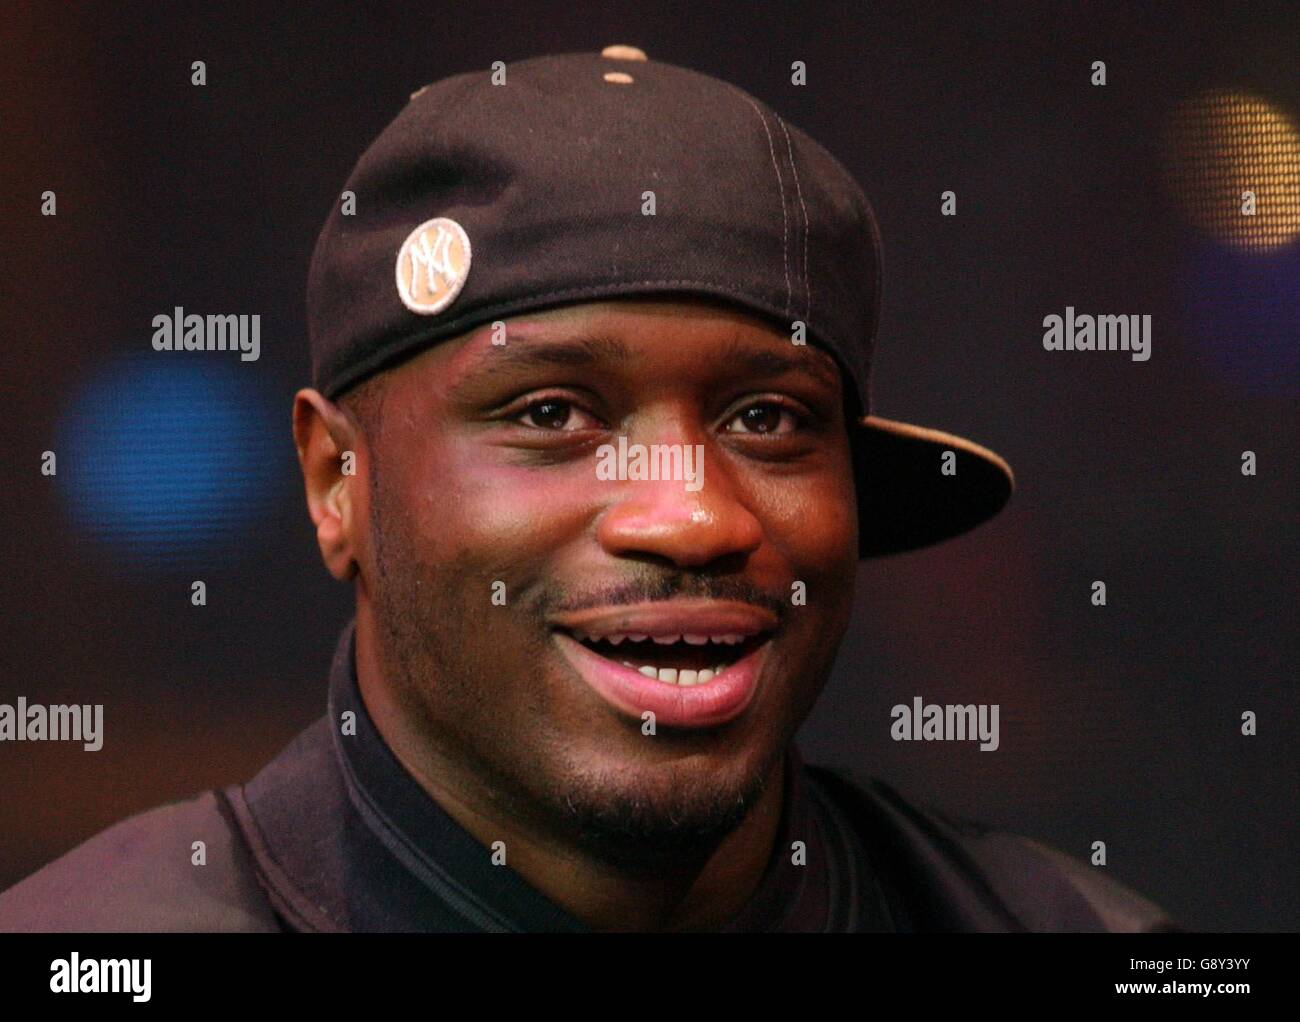 Lethal Bizzle during his guest appearance on MTV's TRL (Total Request Live) show, live from the MTV studios in Leicester Square, central London, Thursday 13 October 2005. PRESS ASSOCIATION Photo. Photo credit should read: Anthony Harvey/PA Stock Photo